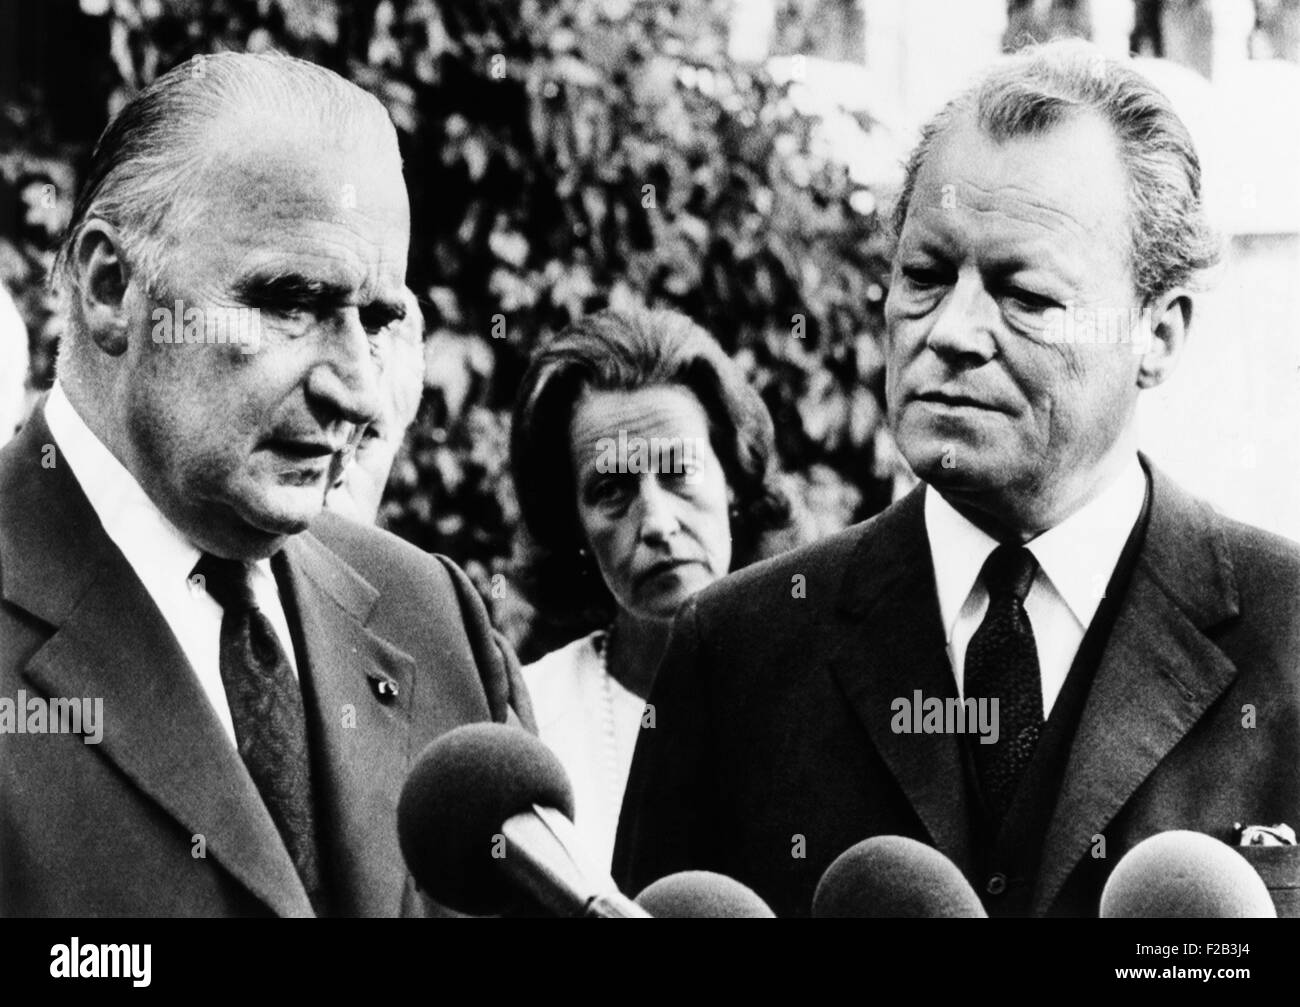 French President Georges Pompidou (left) Munich Massacre at the Summer Olympics, Sept. 6, 1972. Five 'Black September' Palestinian terrorists murdered 11 Israeli athletes and one German policeman. Sept. 19, 1972. - (CSU 2015 6 193) Stock Photo